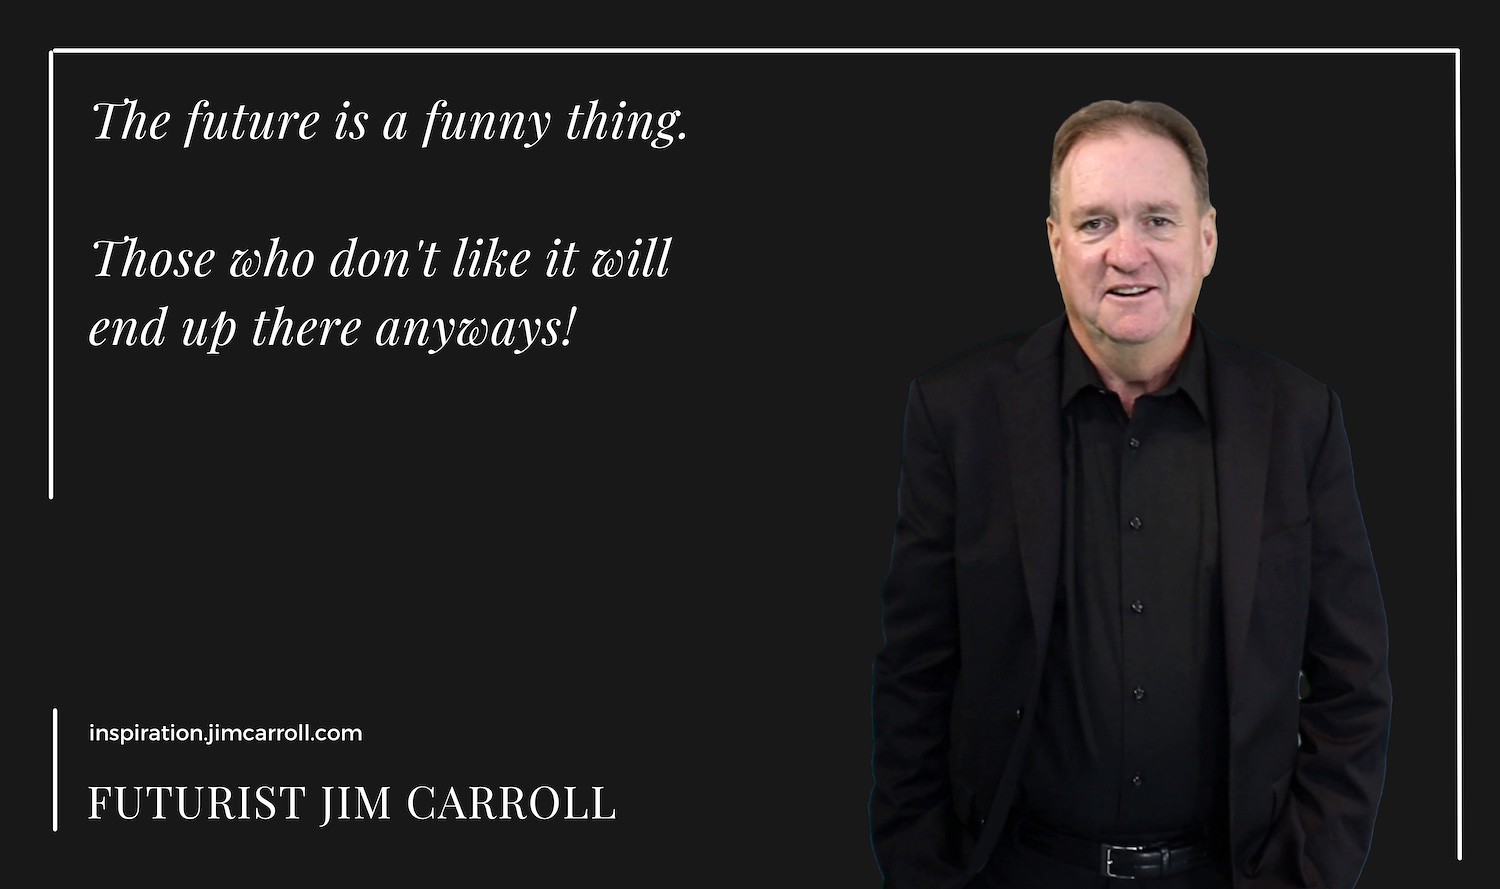 "The future is a funny thing. Those who don't like it will end up there anyways!" - Futurist Jim Carroll